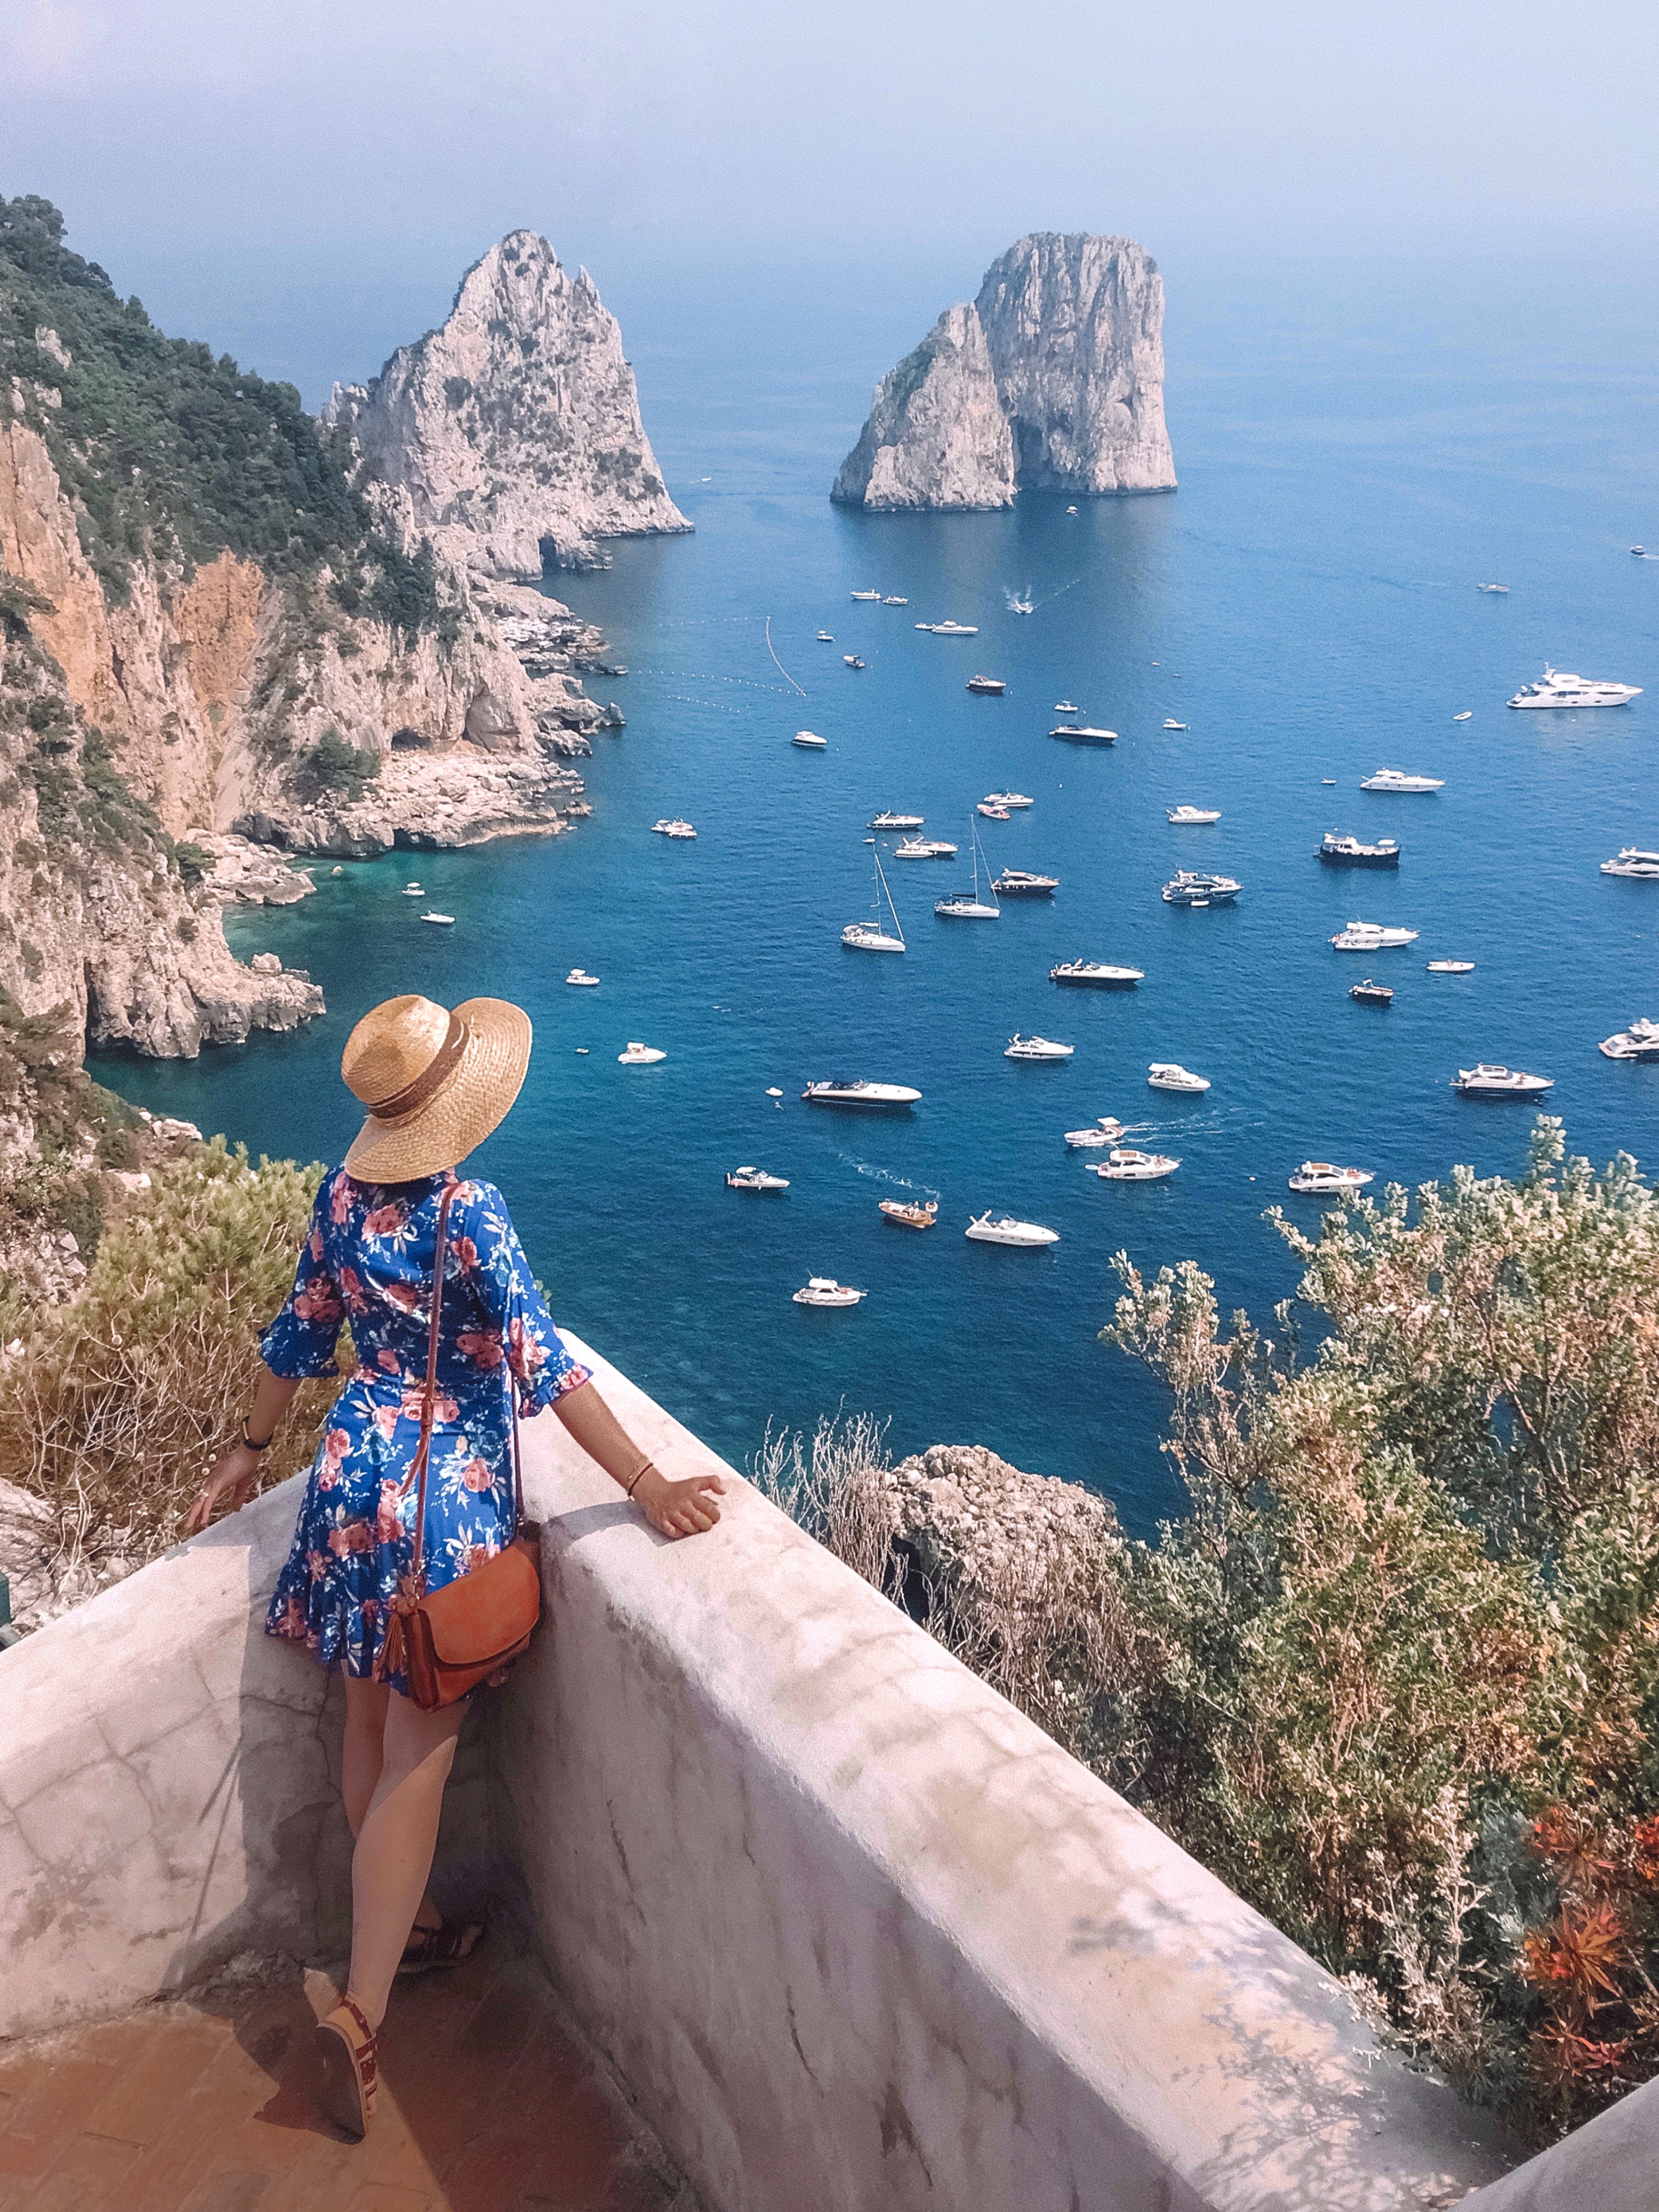 15 Photos That Will Inspire You to Visit Capri, Italy